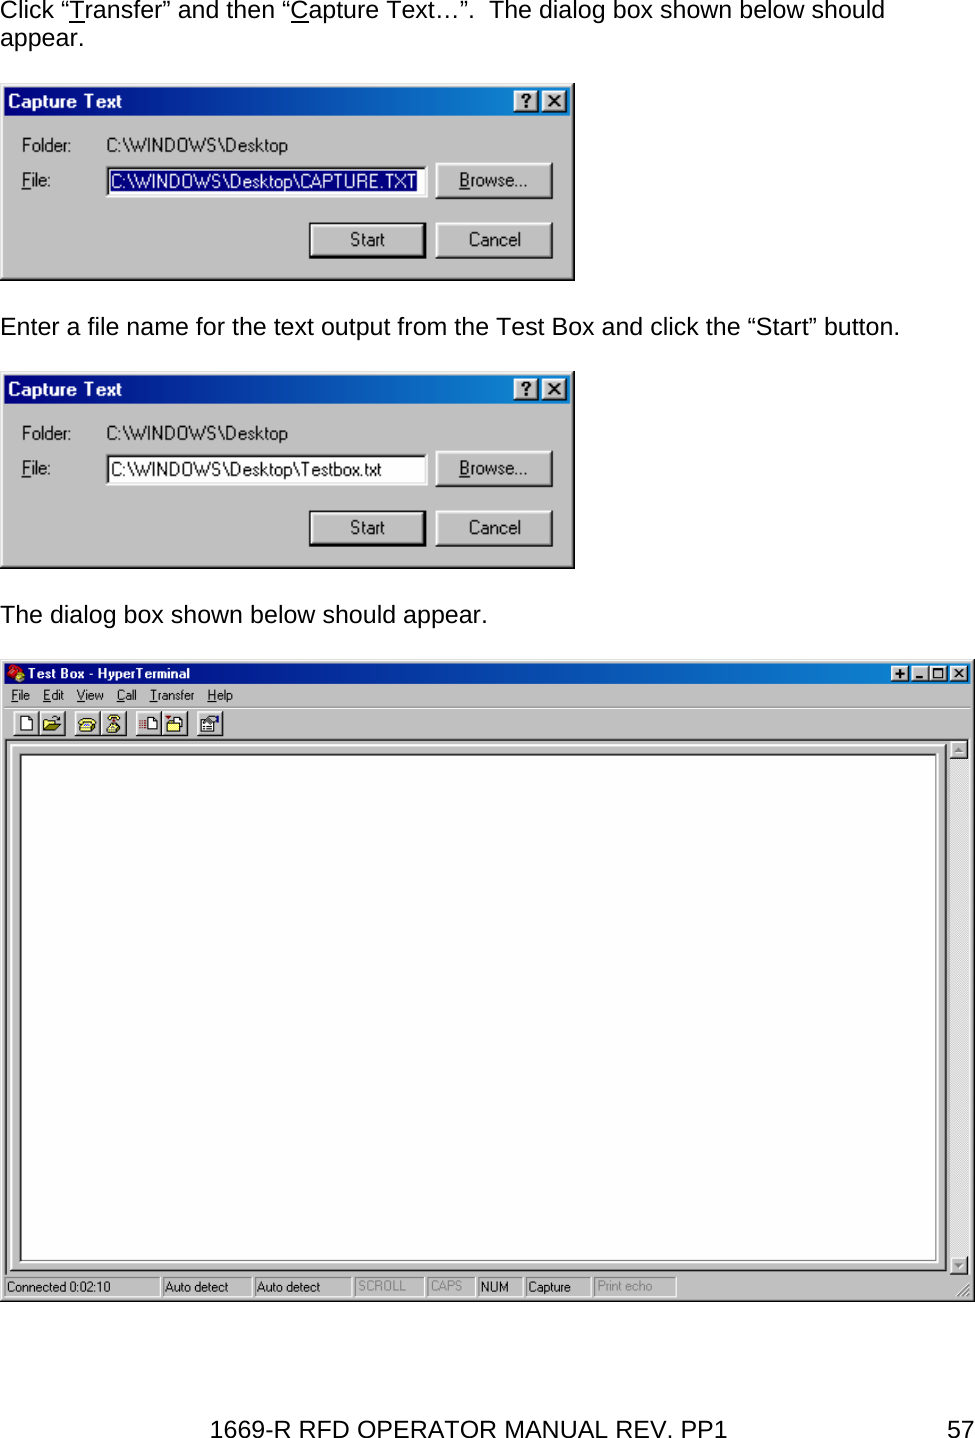 1669-R RFD OPERATOR MANUAL REV. PP1  57Click “Transfer” and then “Capture Text…”.  The dialog box shown below should appear.  Enter a file name for the text output from the Test Box and click the “Start” button.  The dialog box shown below should appear.   